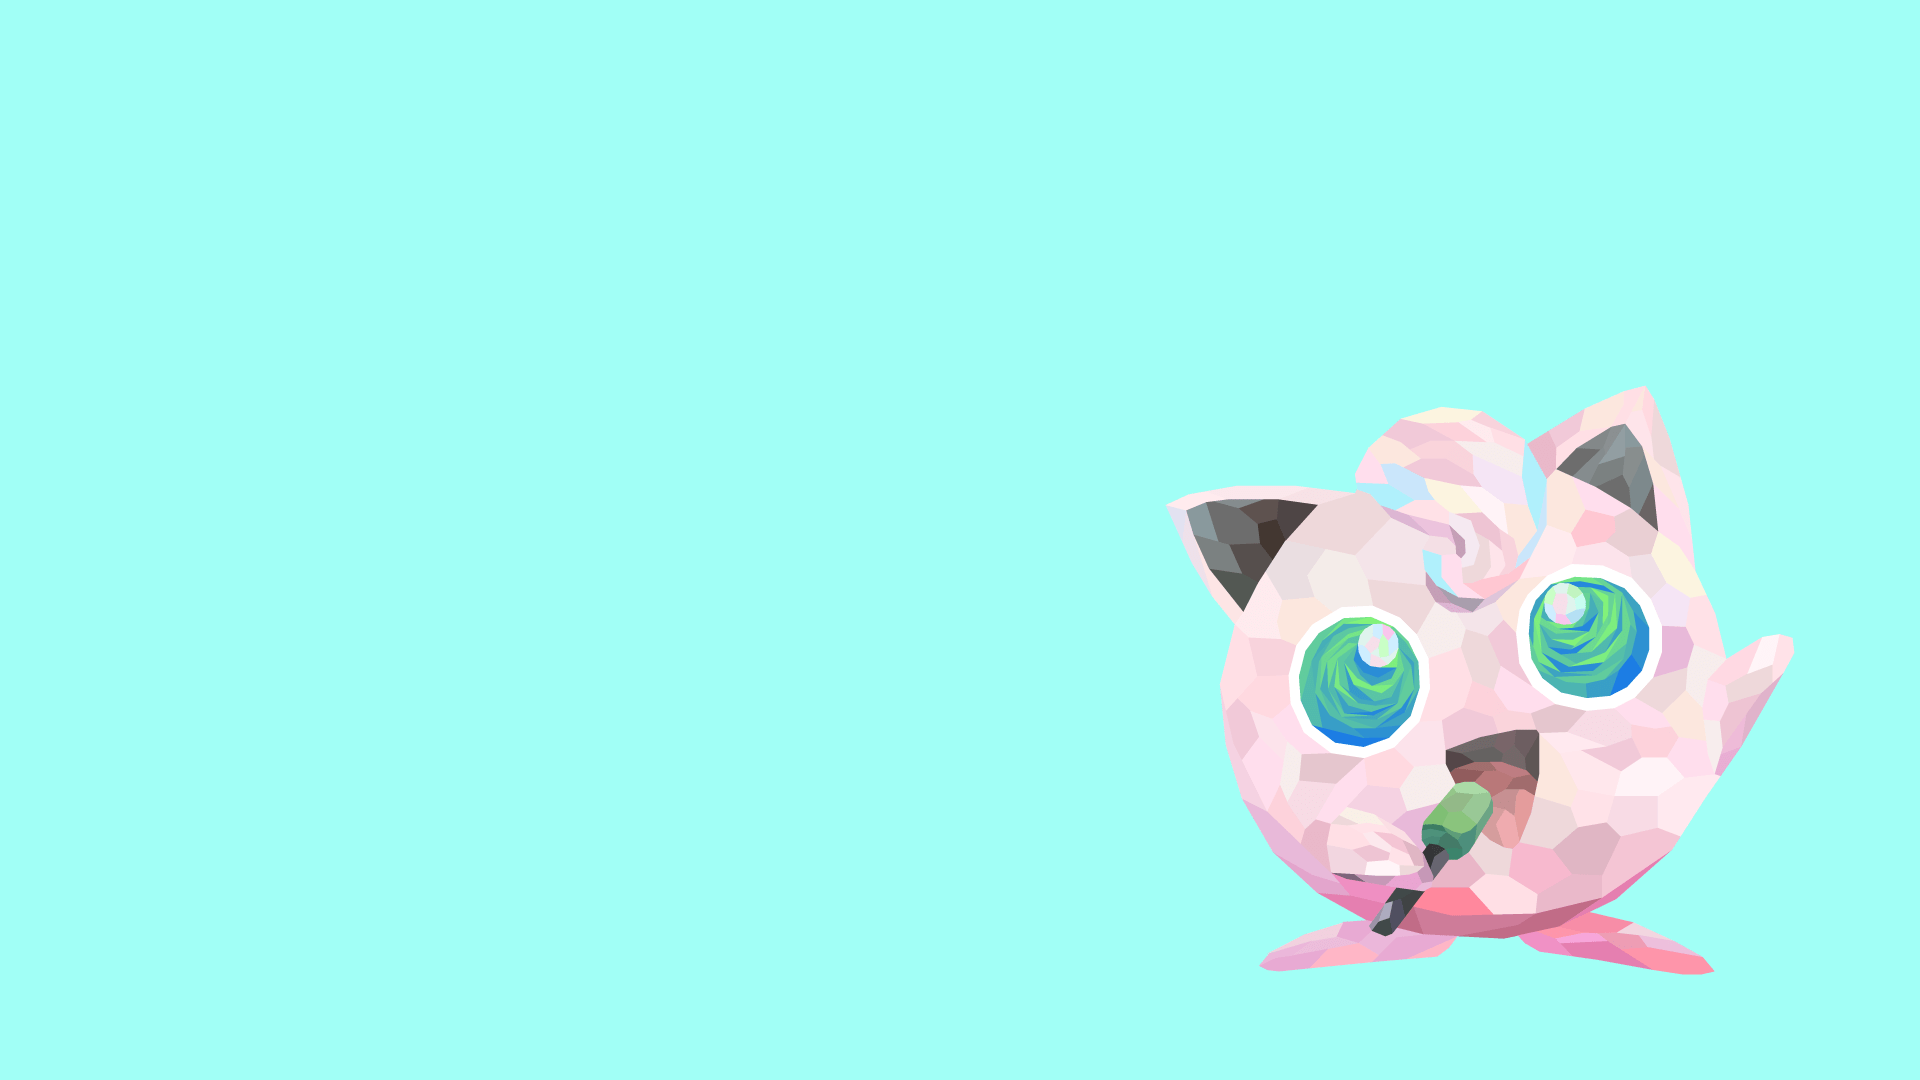 Low poly art for Jigglypuff